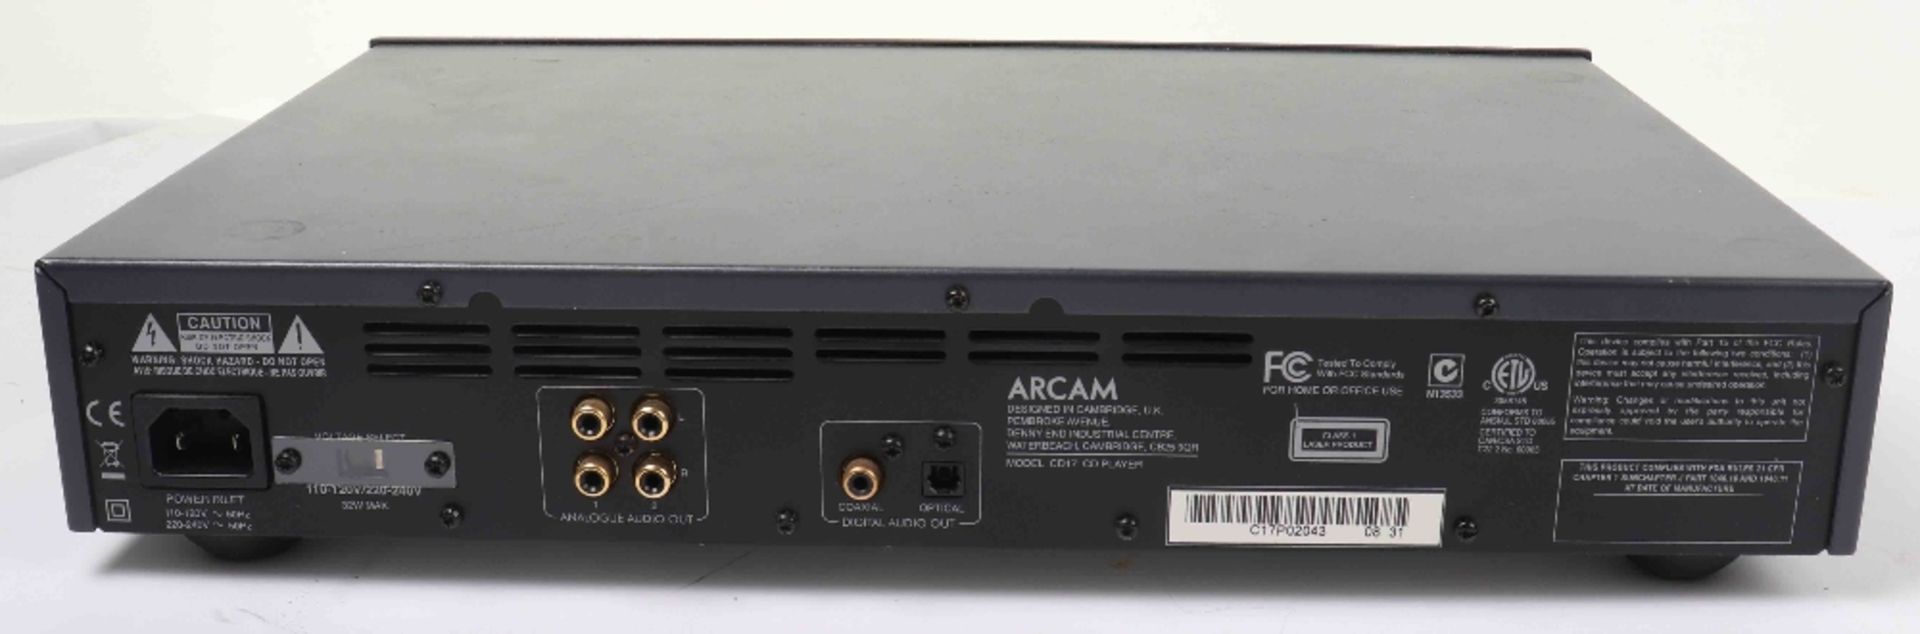 An Arcam A18 Integrated Amplifier, with an Arcam CD17 Compact Disc Player - Image 5 of 6